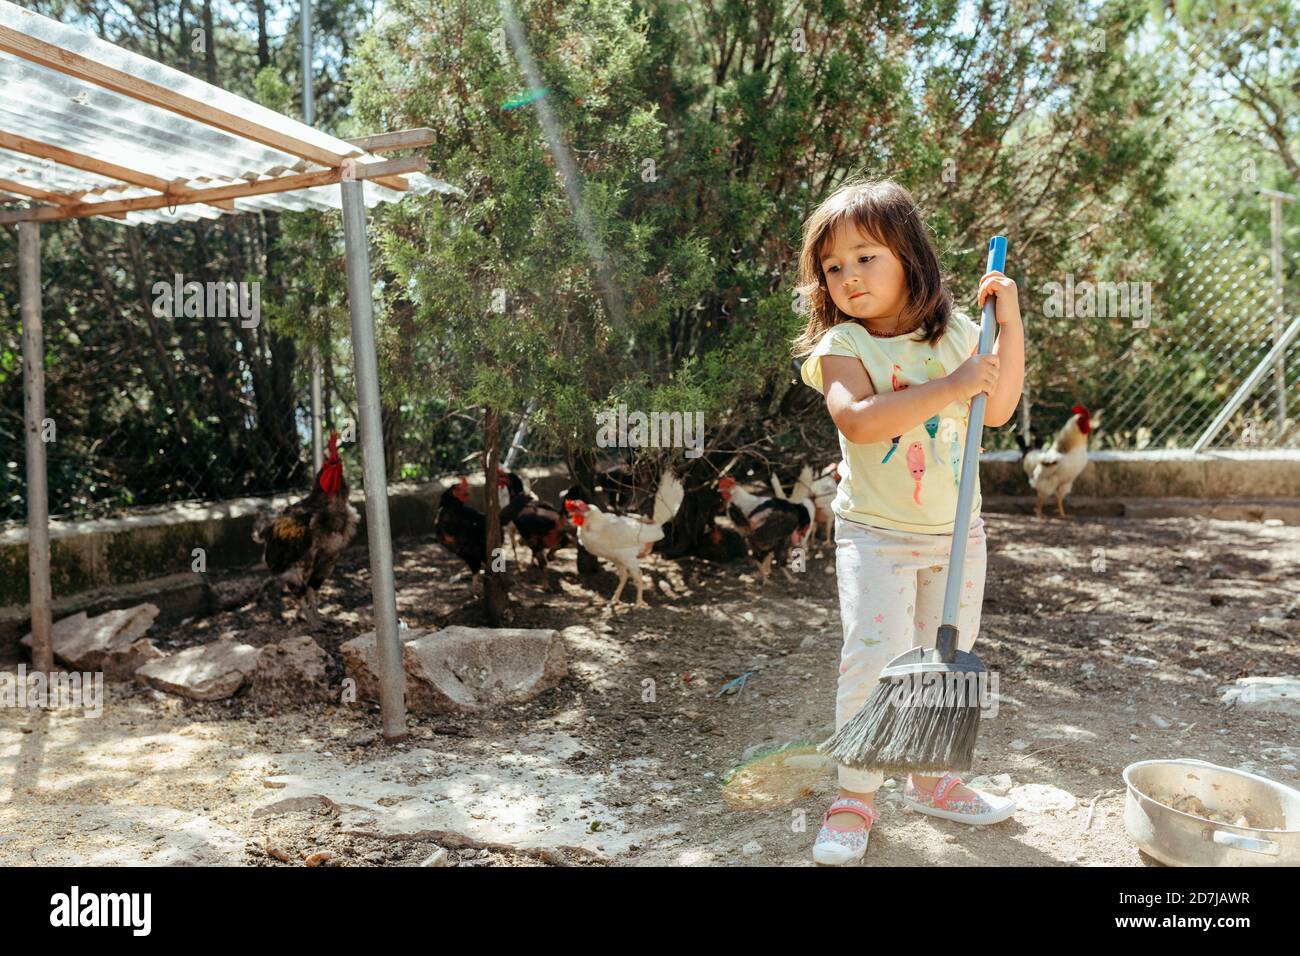 Girl sweeping chicken farm with broom Stock Photo